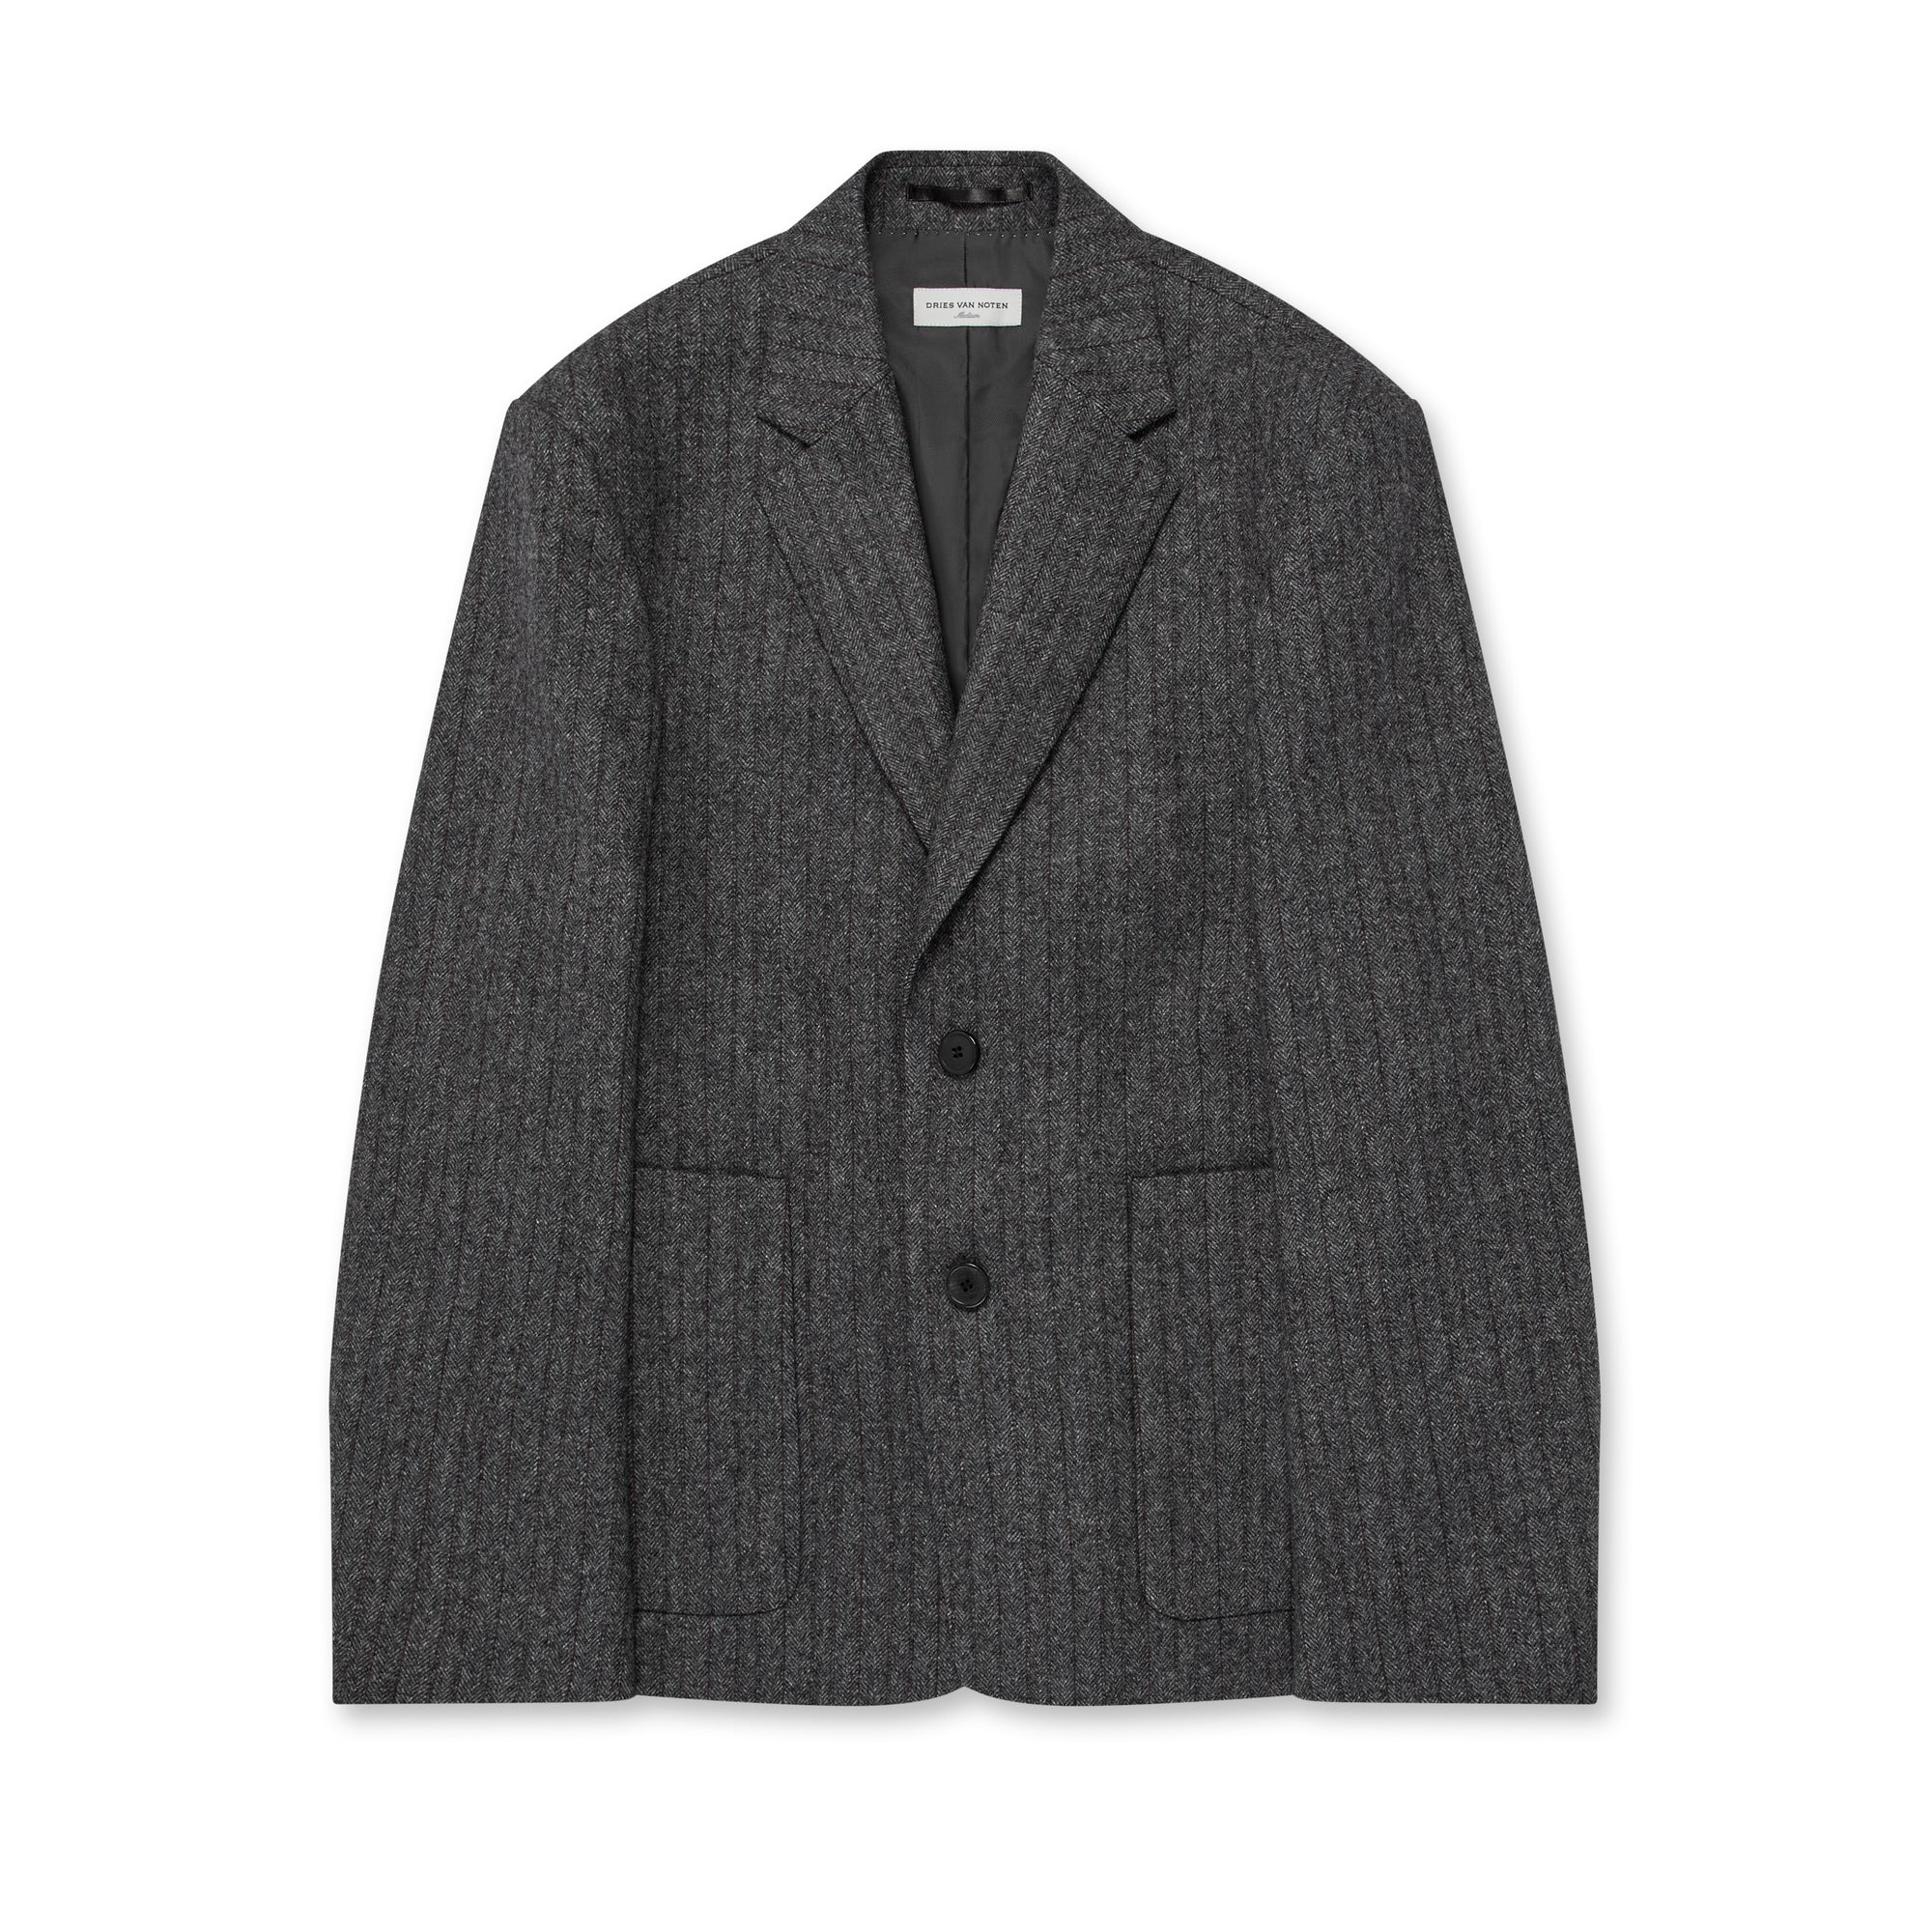 Dries Van Noten - Men’s Boxy Single Breasted Blazer With Patch Pockets - (Grey) view 5